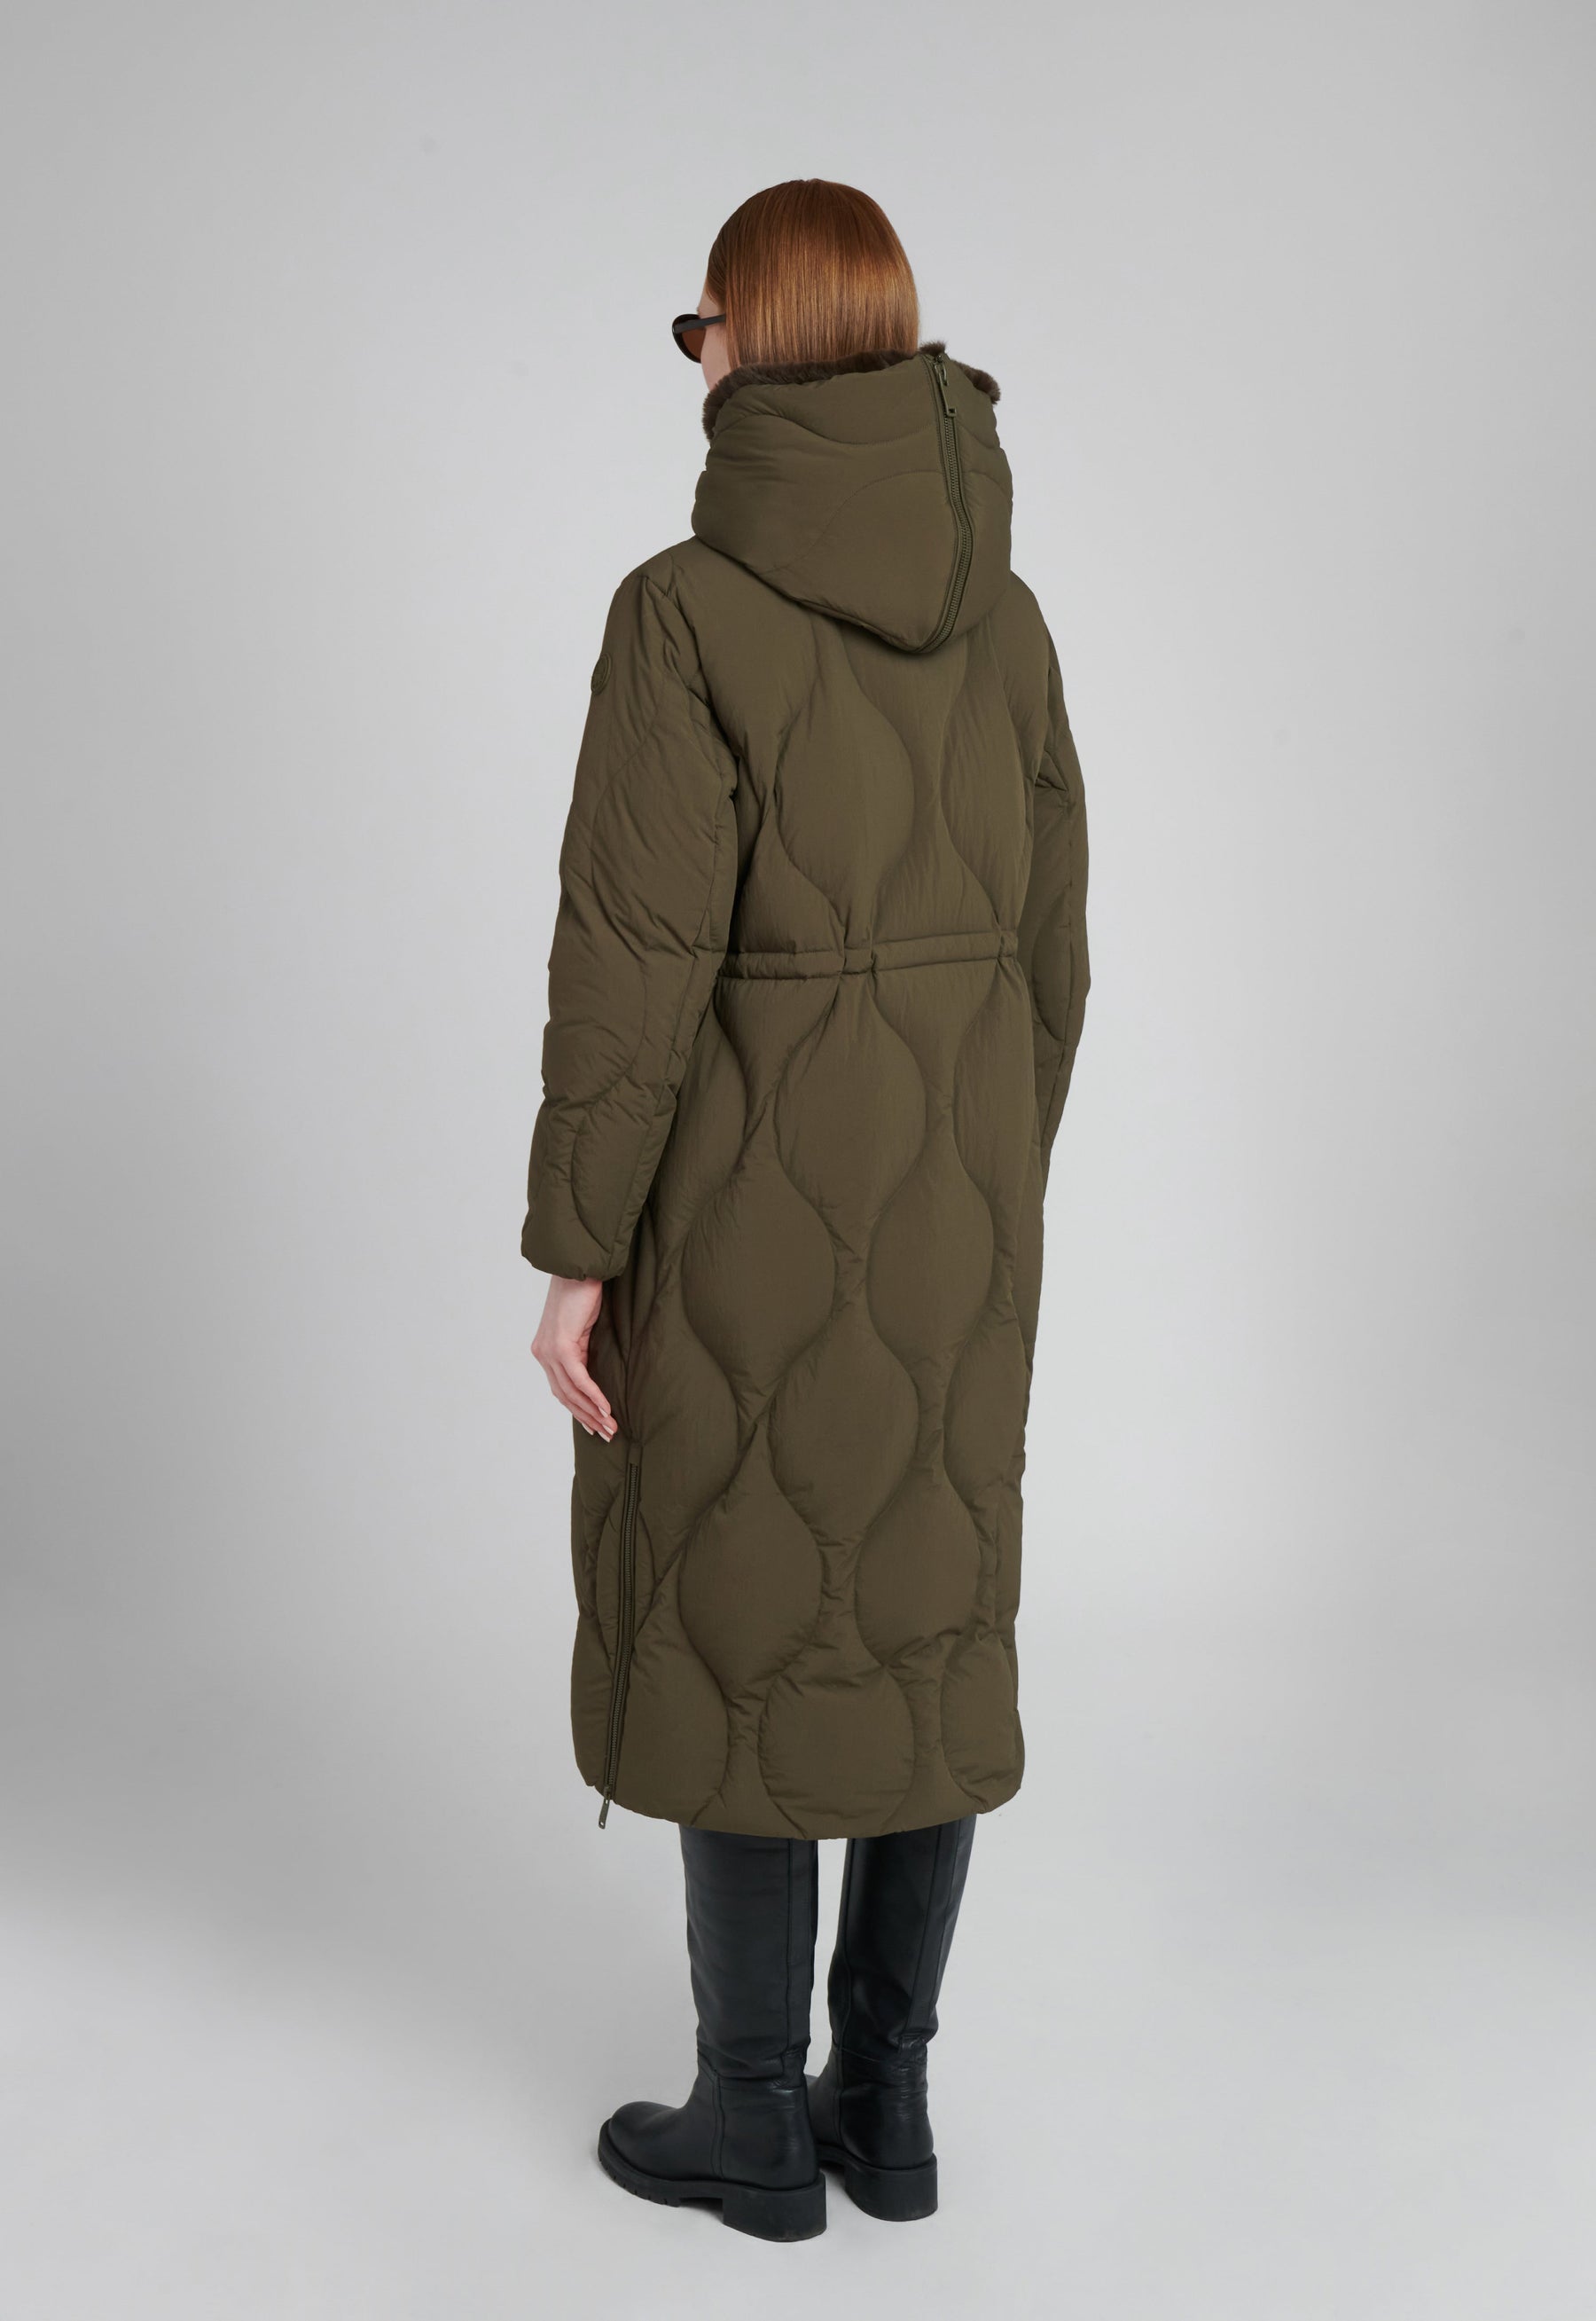 khaki olive green long quilted winter coat with down